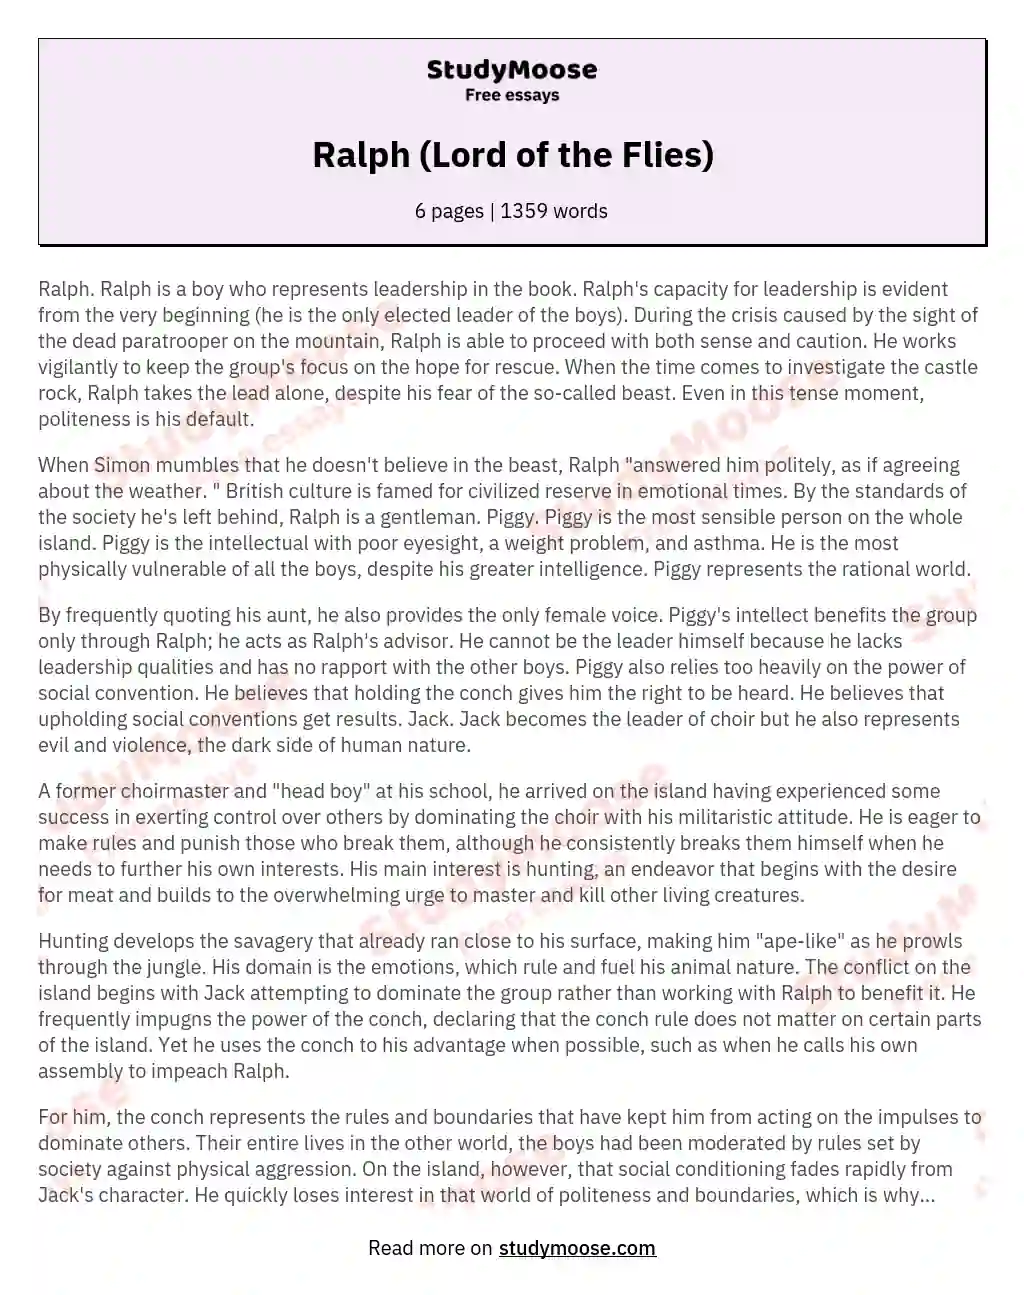 lord of the flies essay ralph